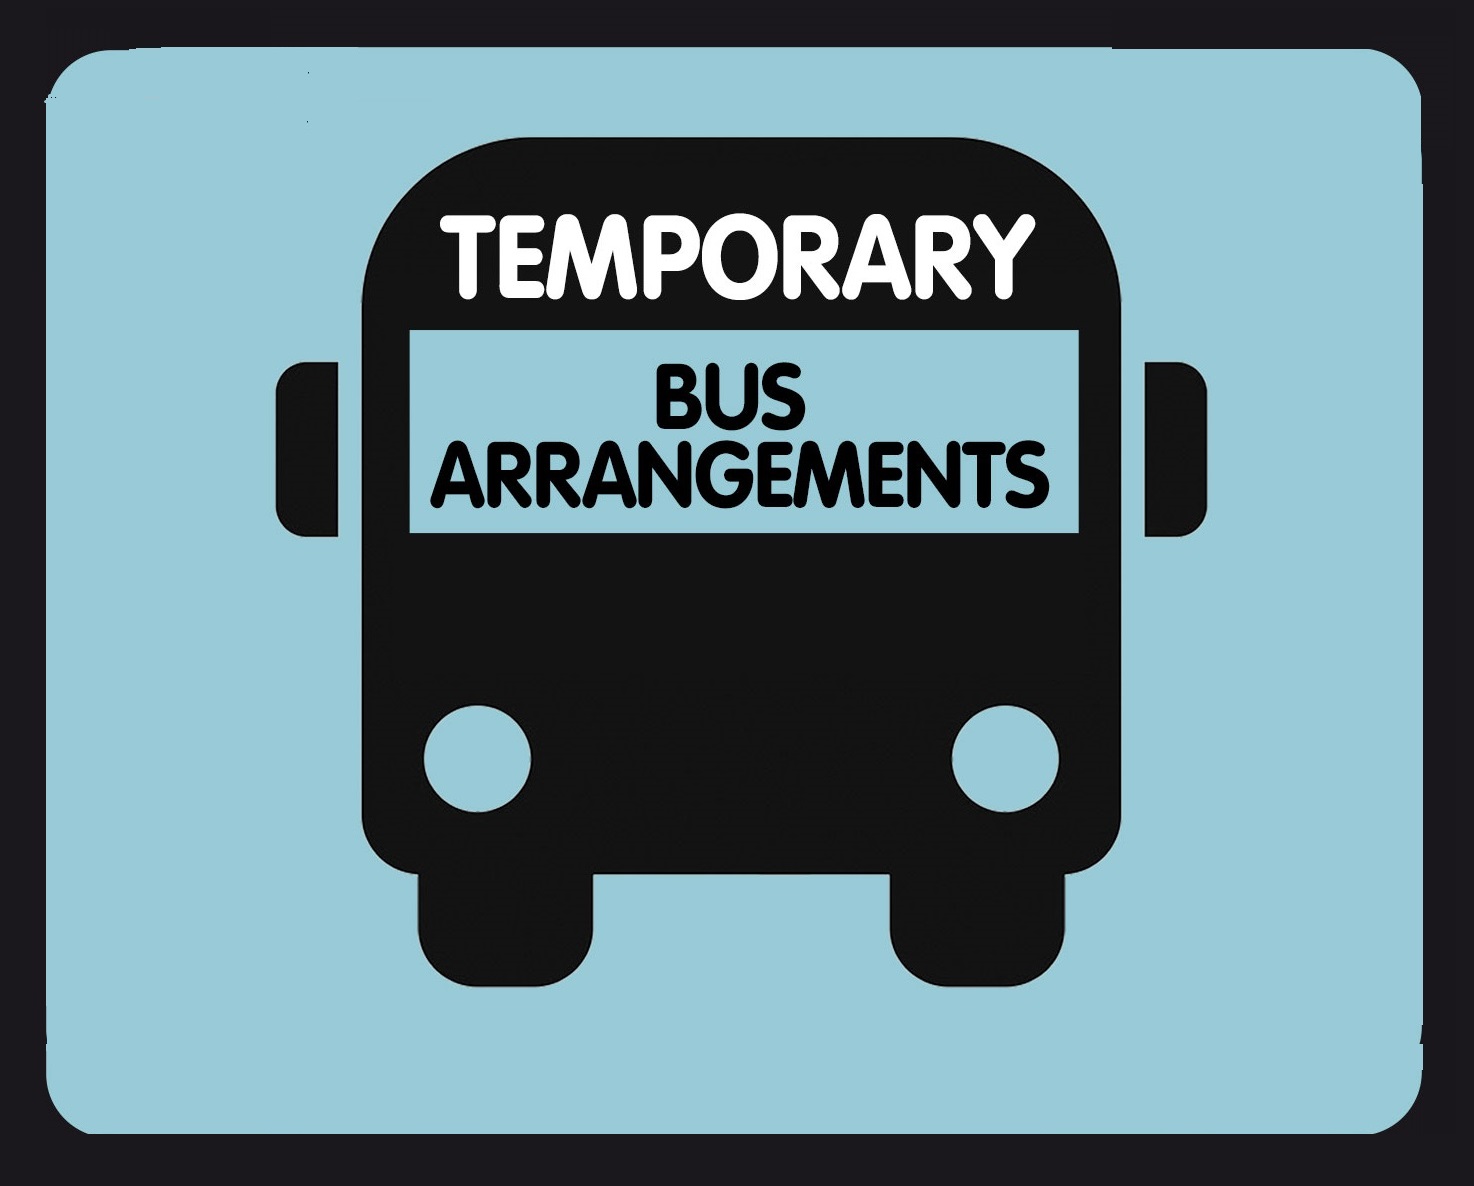 Changes to evening bus arrangements in Gilfach Goch for nearby works